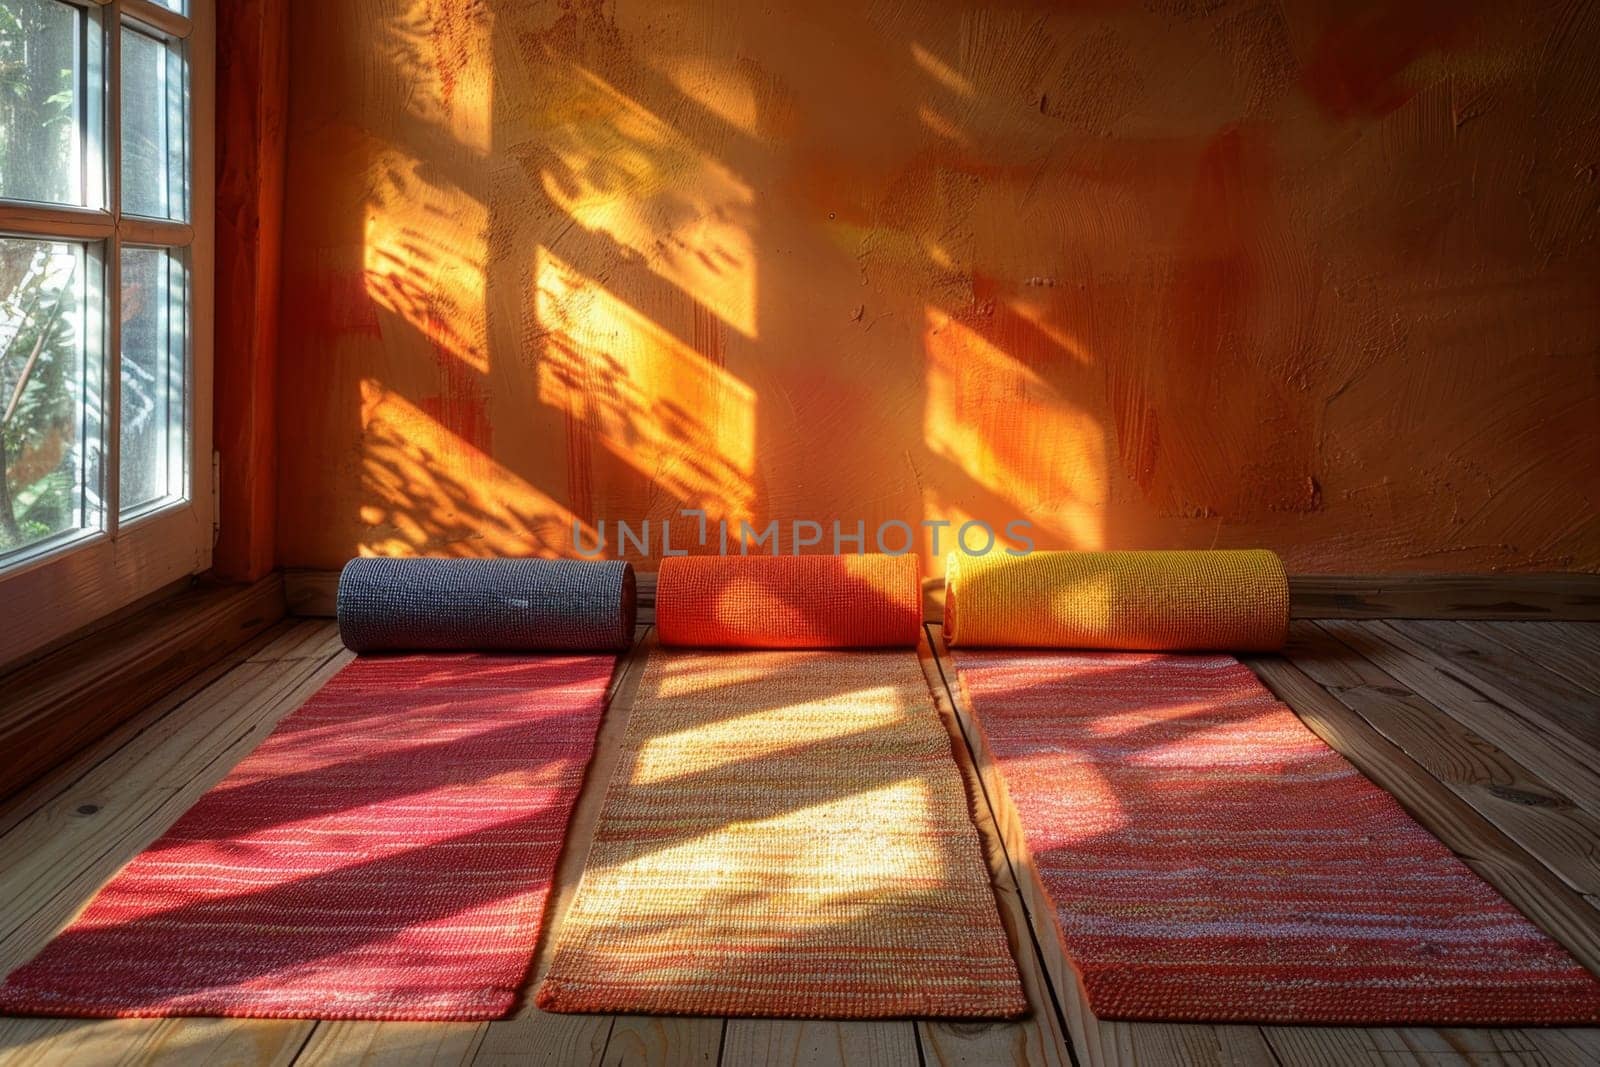 Yoga mats are spread out on the wooden floor in the room. International Yoga Day.